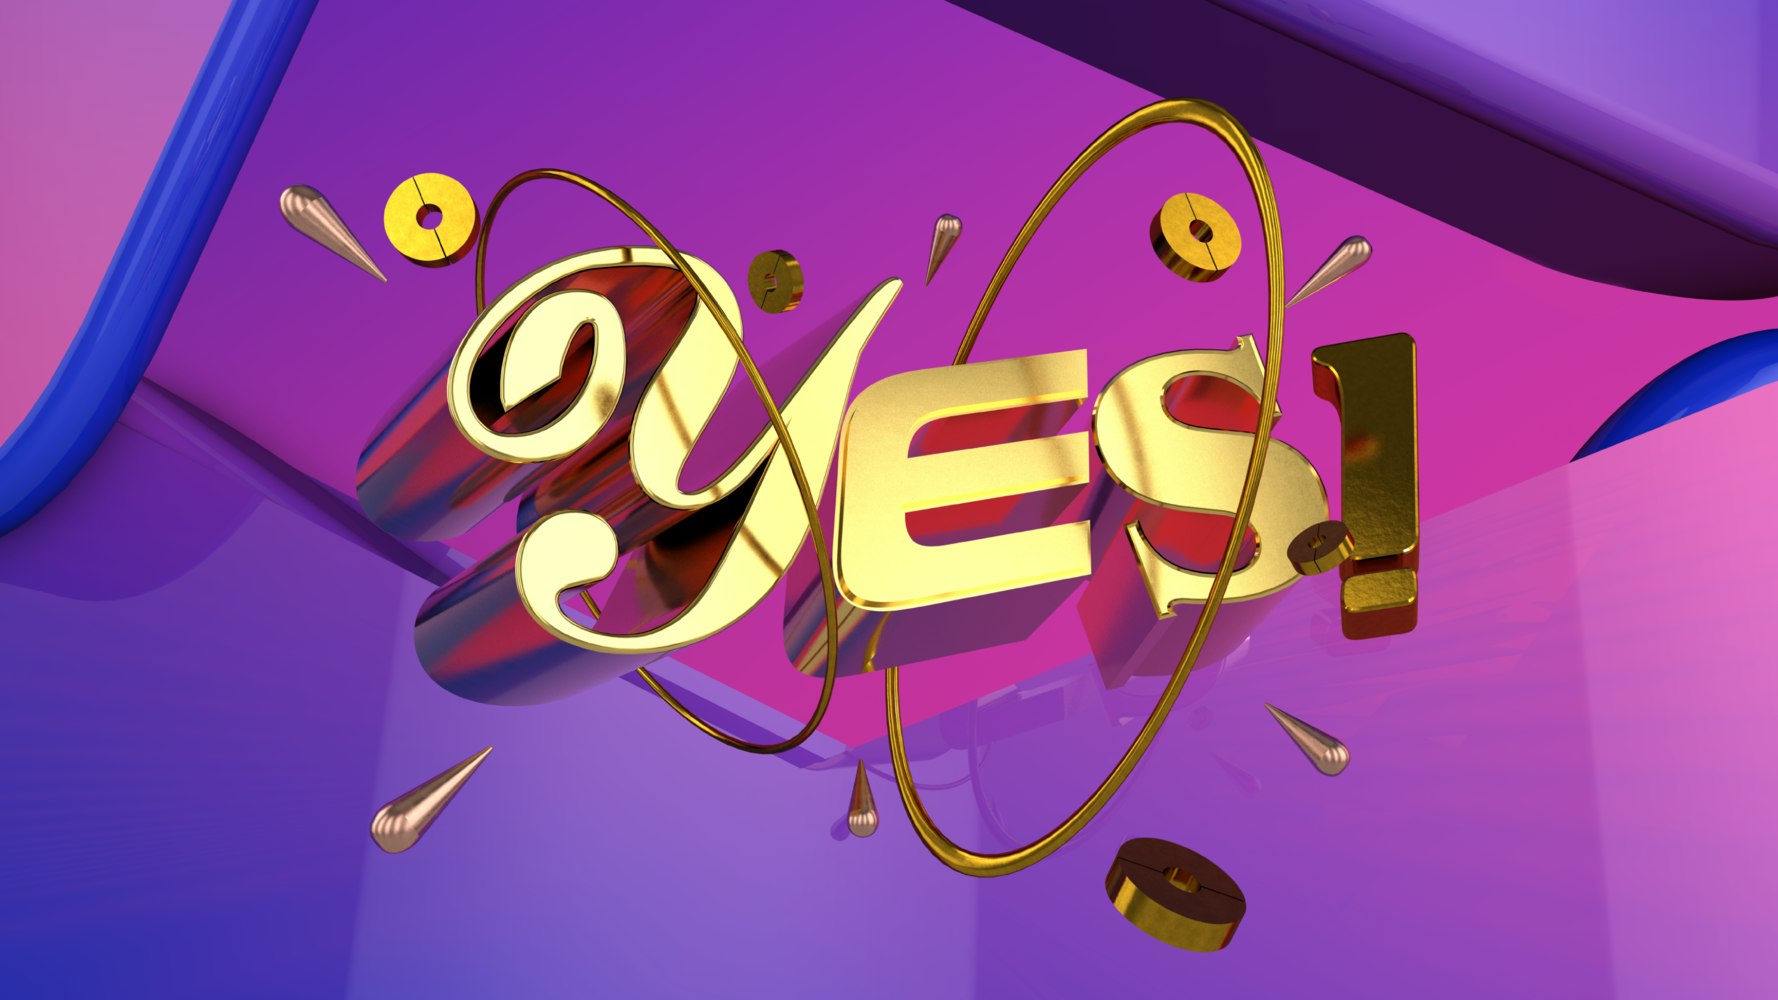 The word Yes featuring floating 3D objects